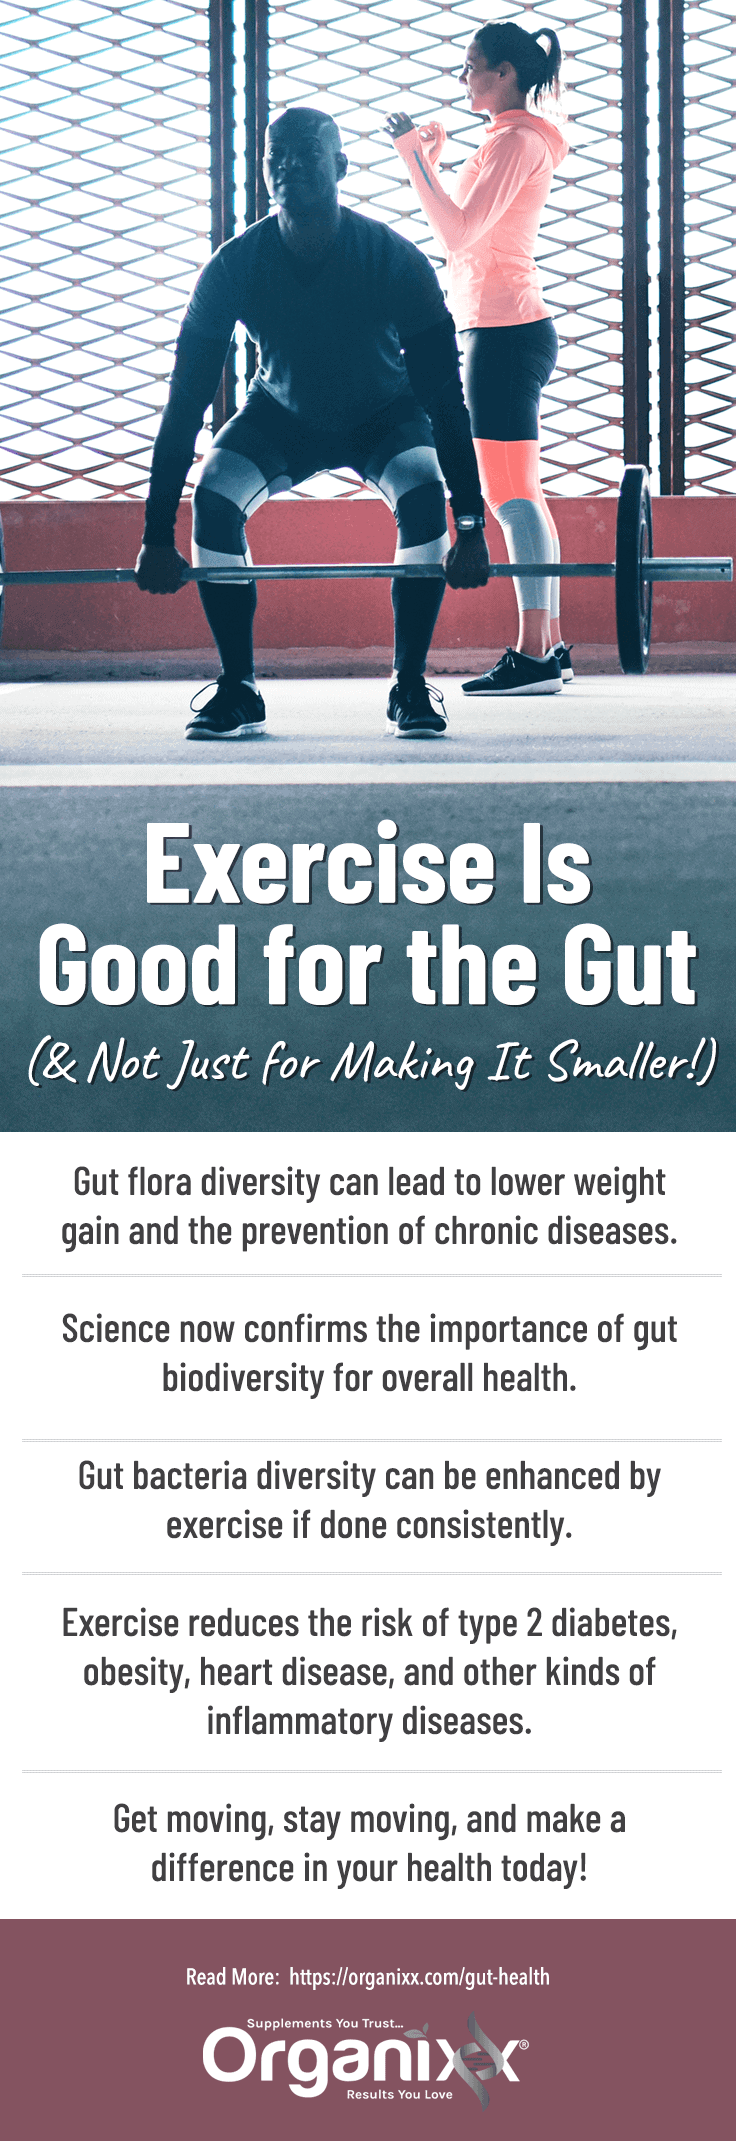 Infographic with list of reasons why exercise is good for gut health